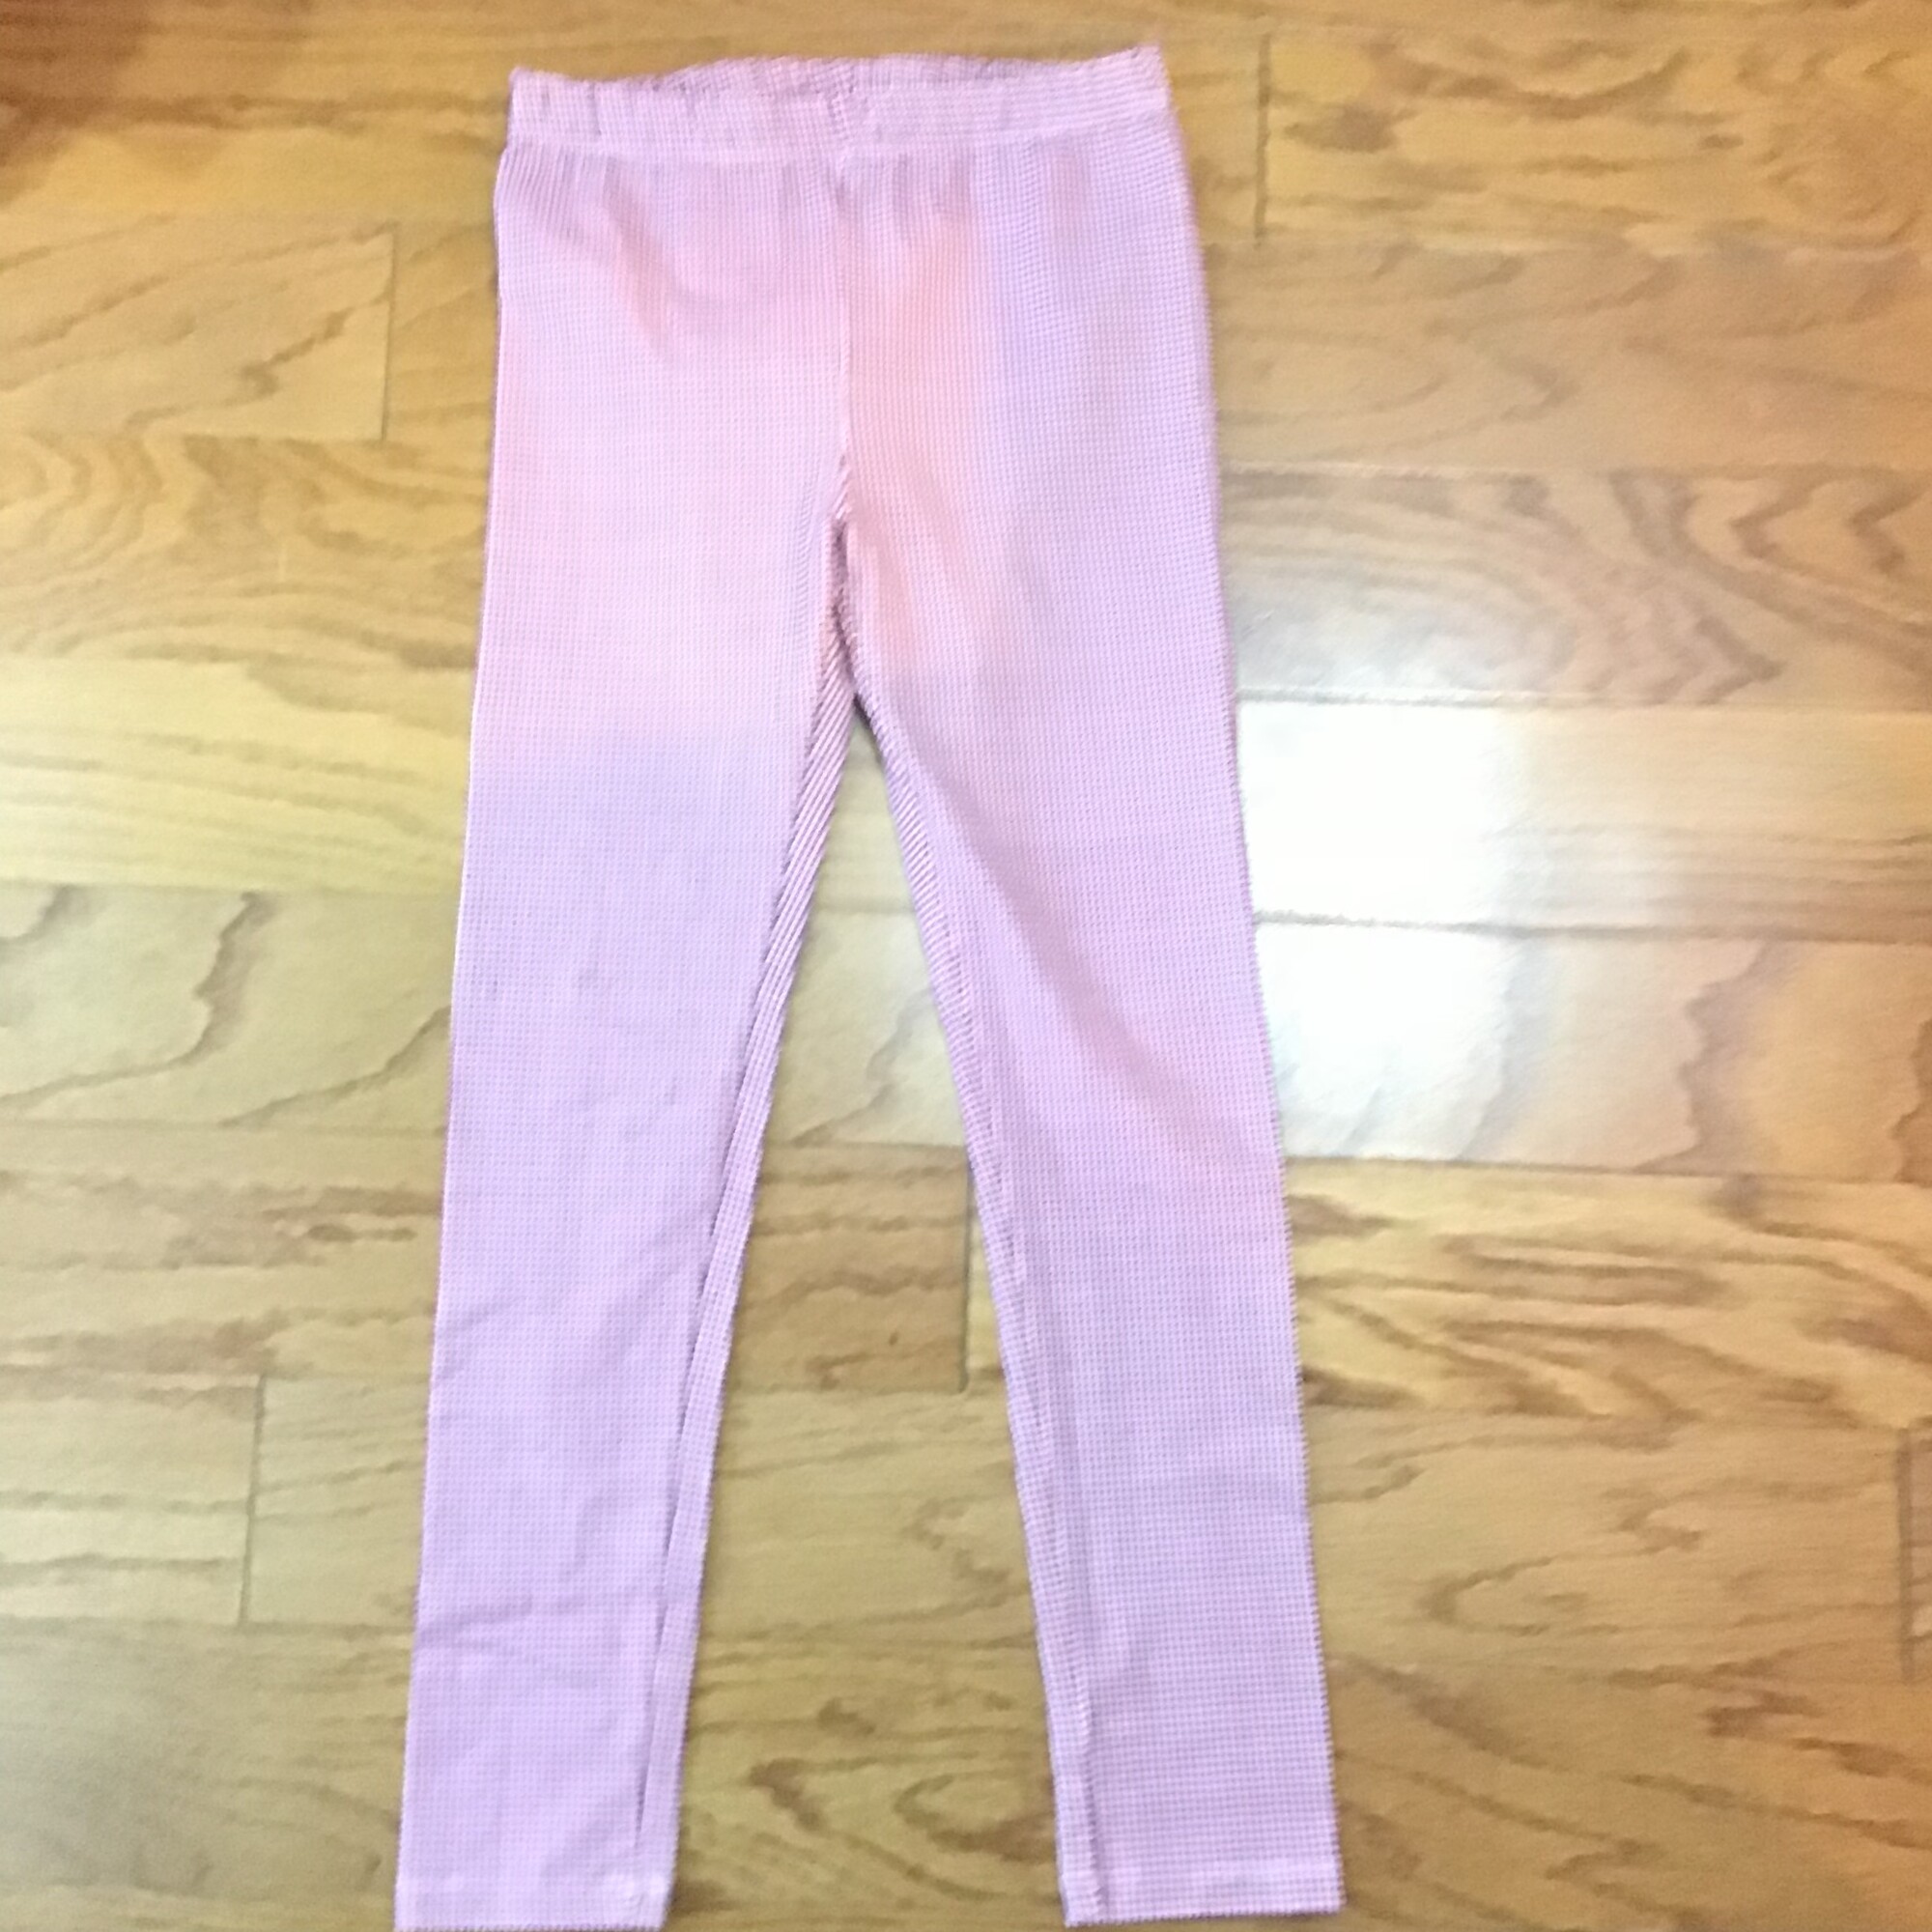 Mayoral Legging, Pink, Size: 7

ALL ONLINE SALES ARE FINAL.
NO RETURNS
REFUNDS
OR EXCHANGES

PLEASE ALLOW AT LEAST 1 WEEK FOR SHIPMENT. THANK YOU FOR SHOPPING SMALL!